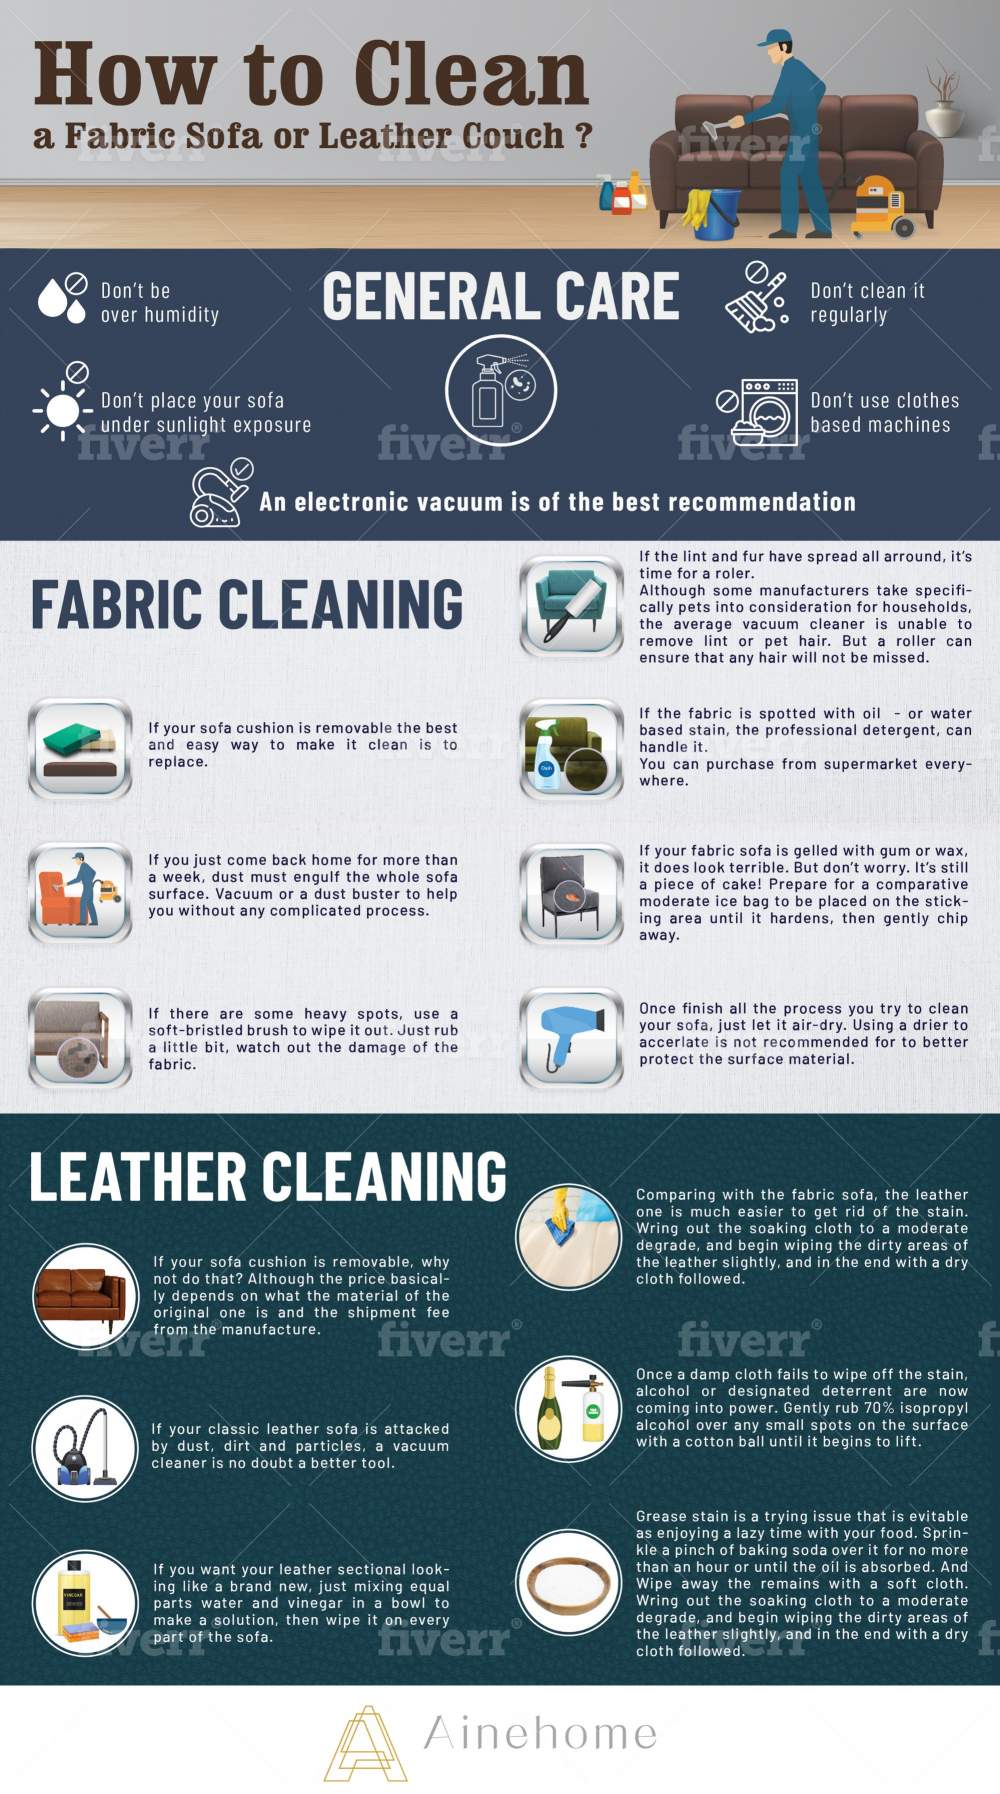 How to Clean a Fabric Sofa or Leather Couch